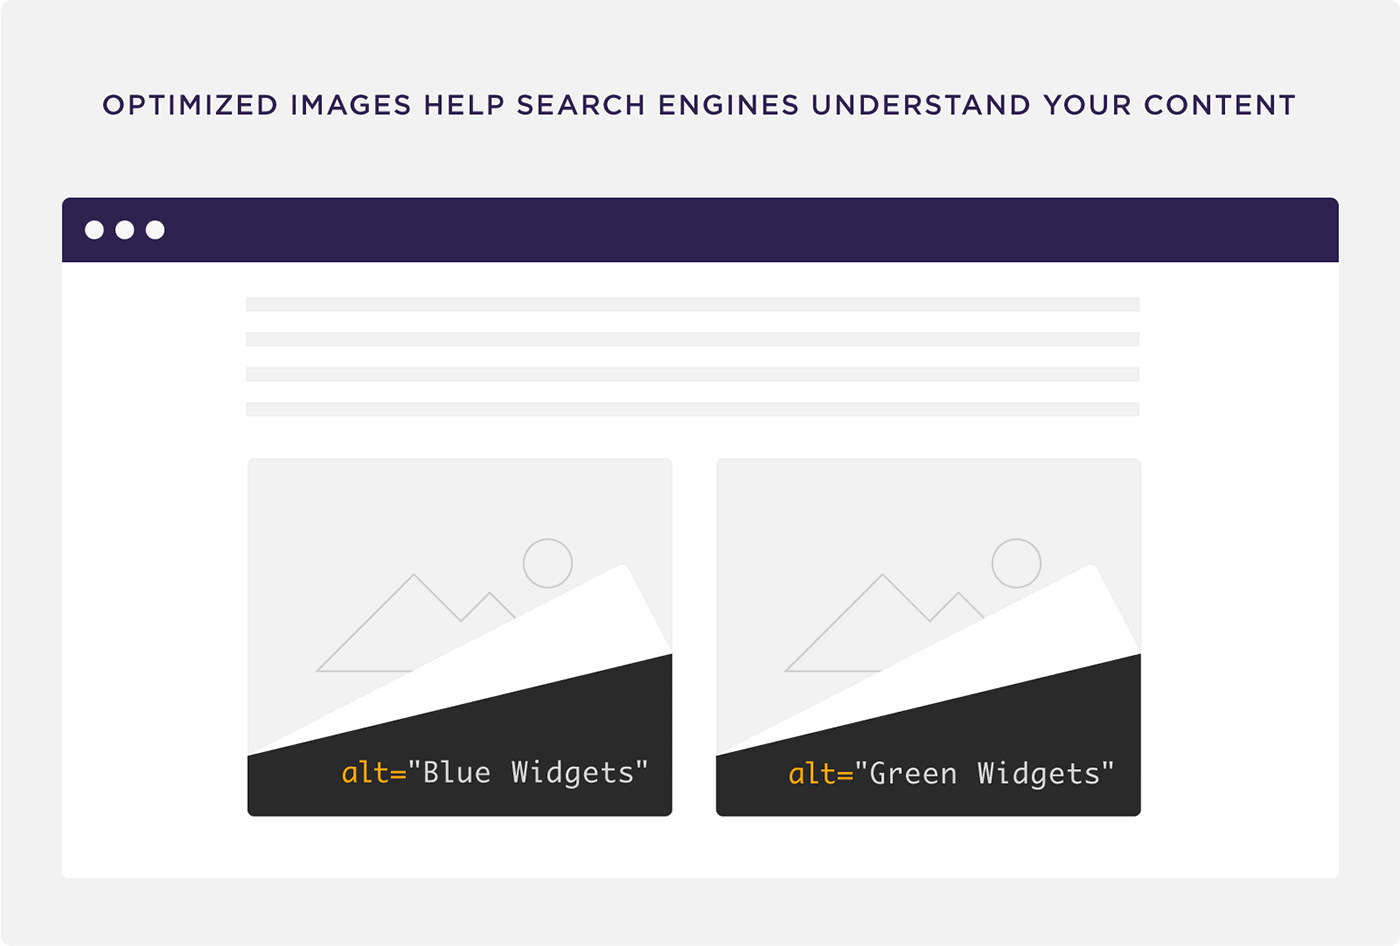 Optimized images help search engines understand your content